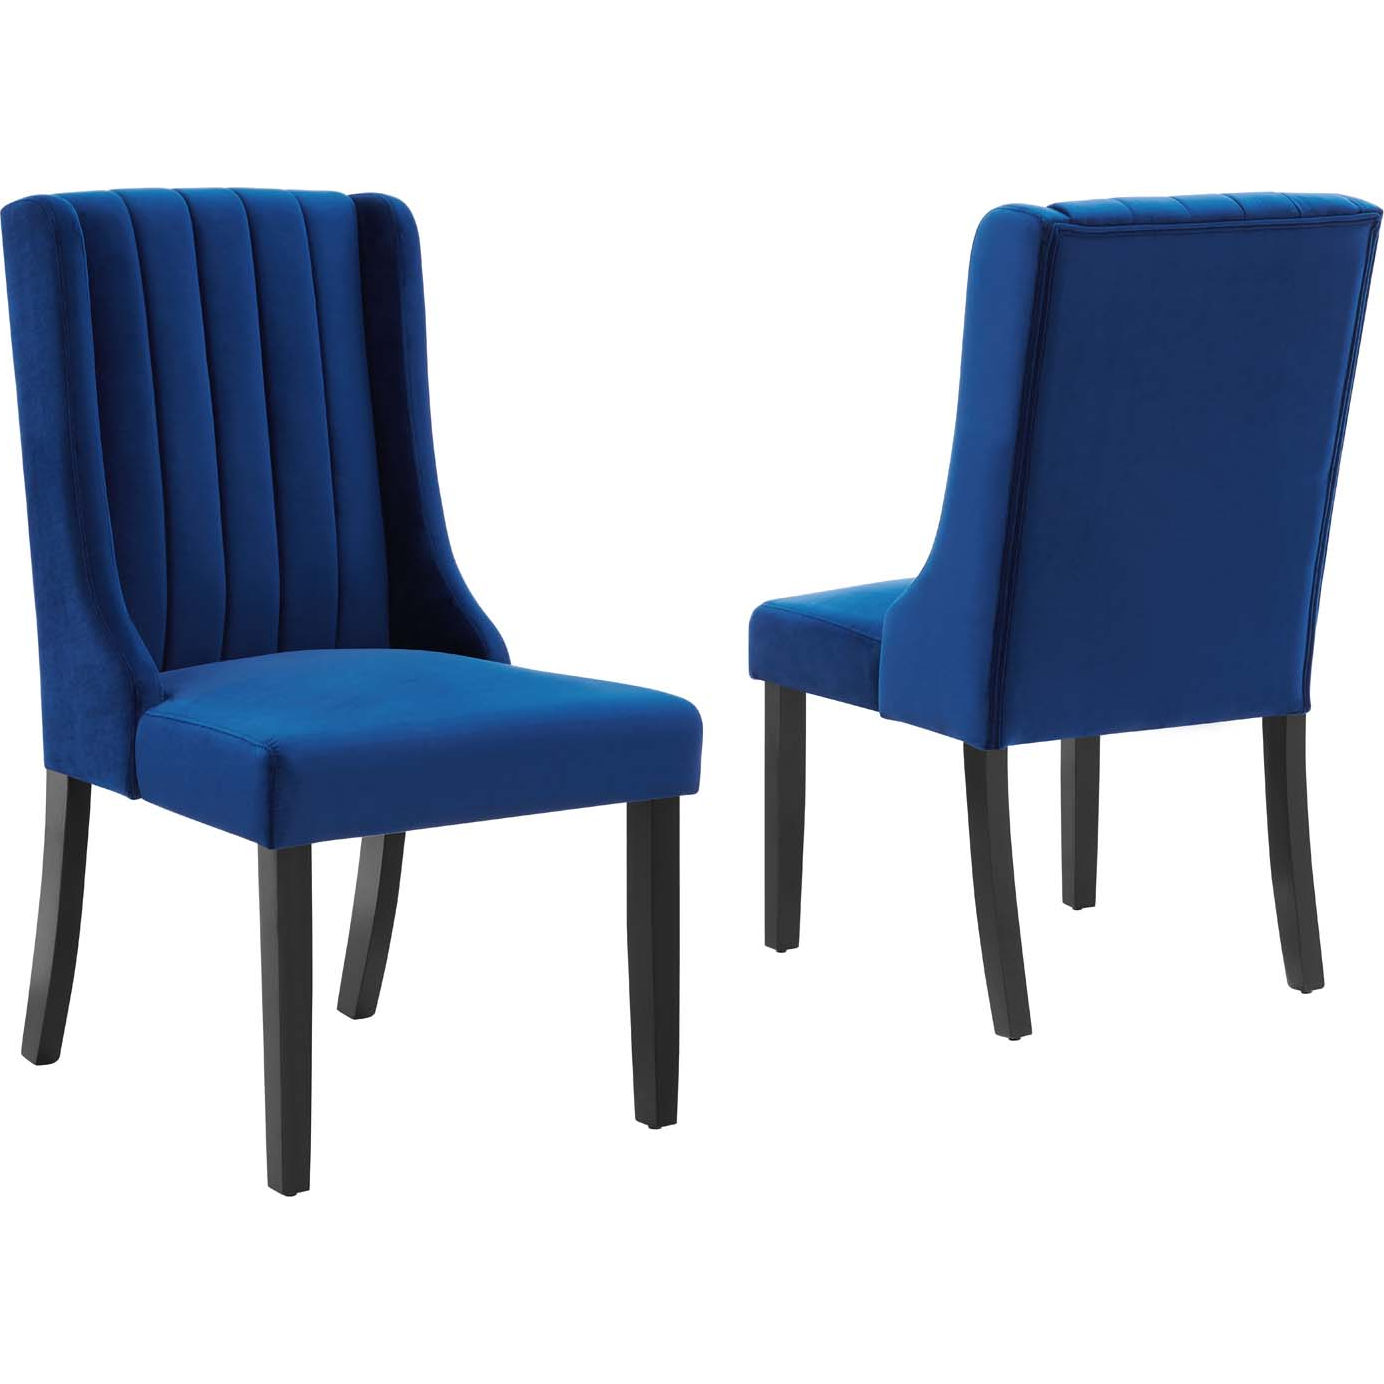 Parsons Dining Chair, Navy Blue Parsons Dining Chairs